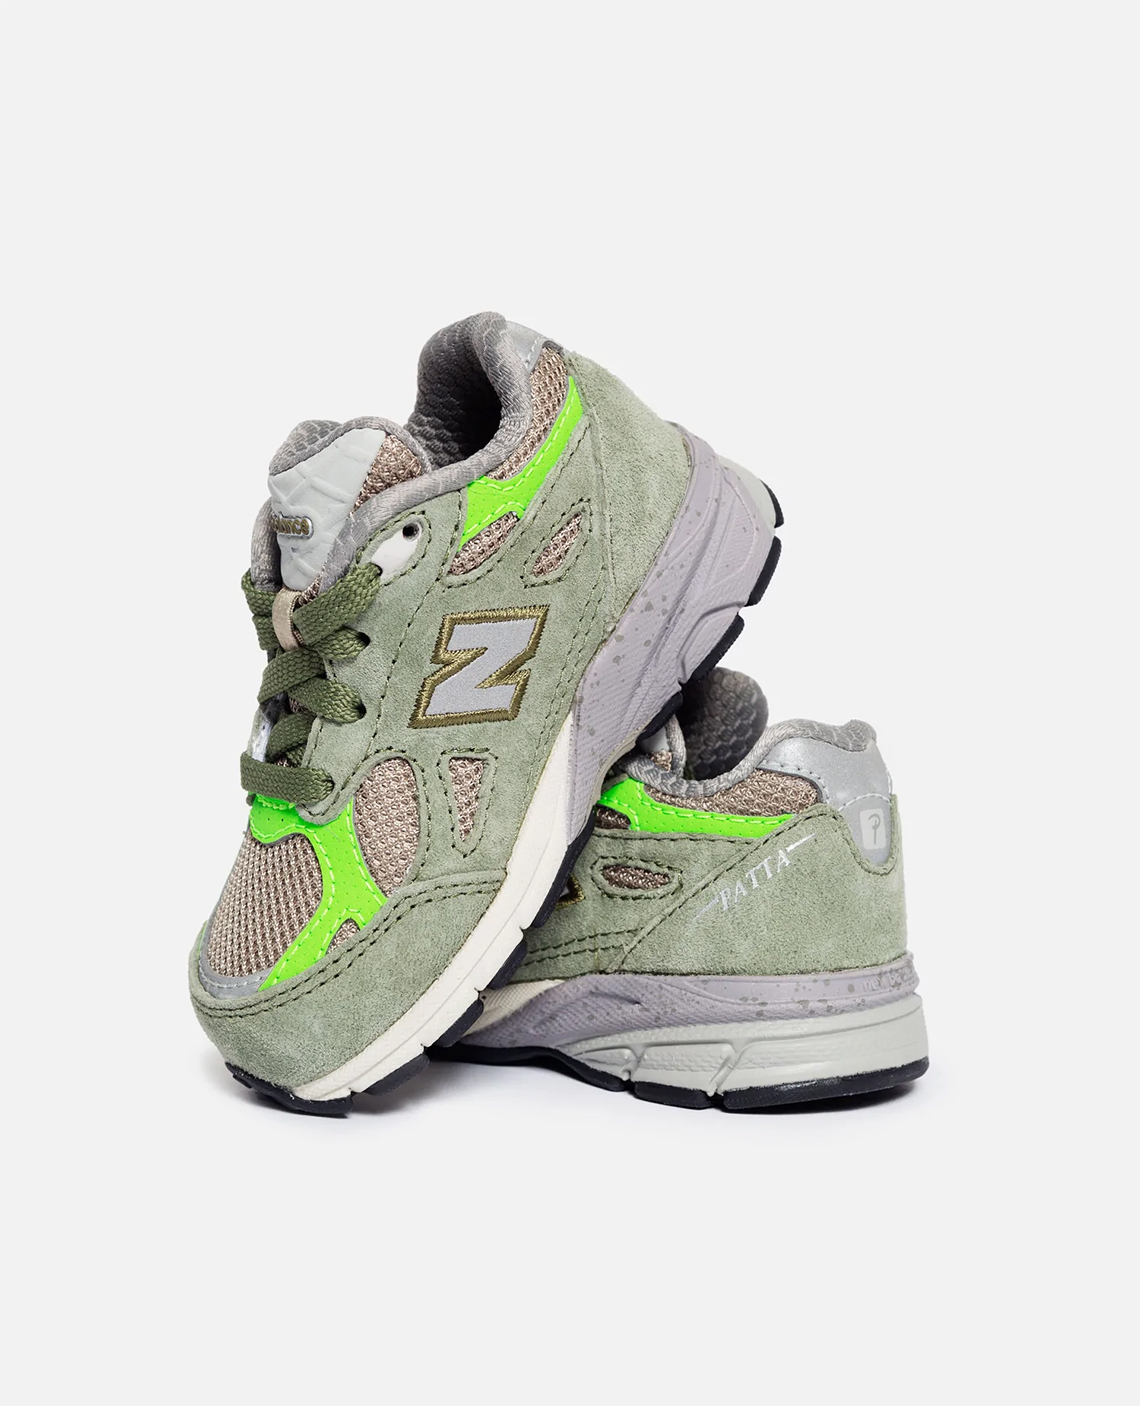 Patta New Balance X Racer Cordura trainers in blue Ic990pp3 1